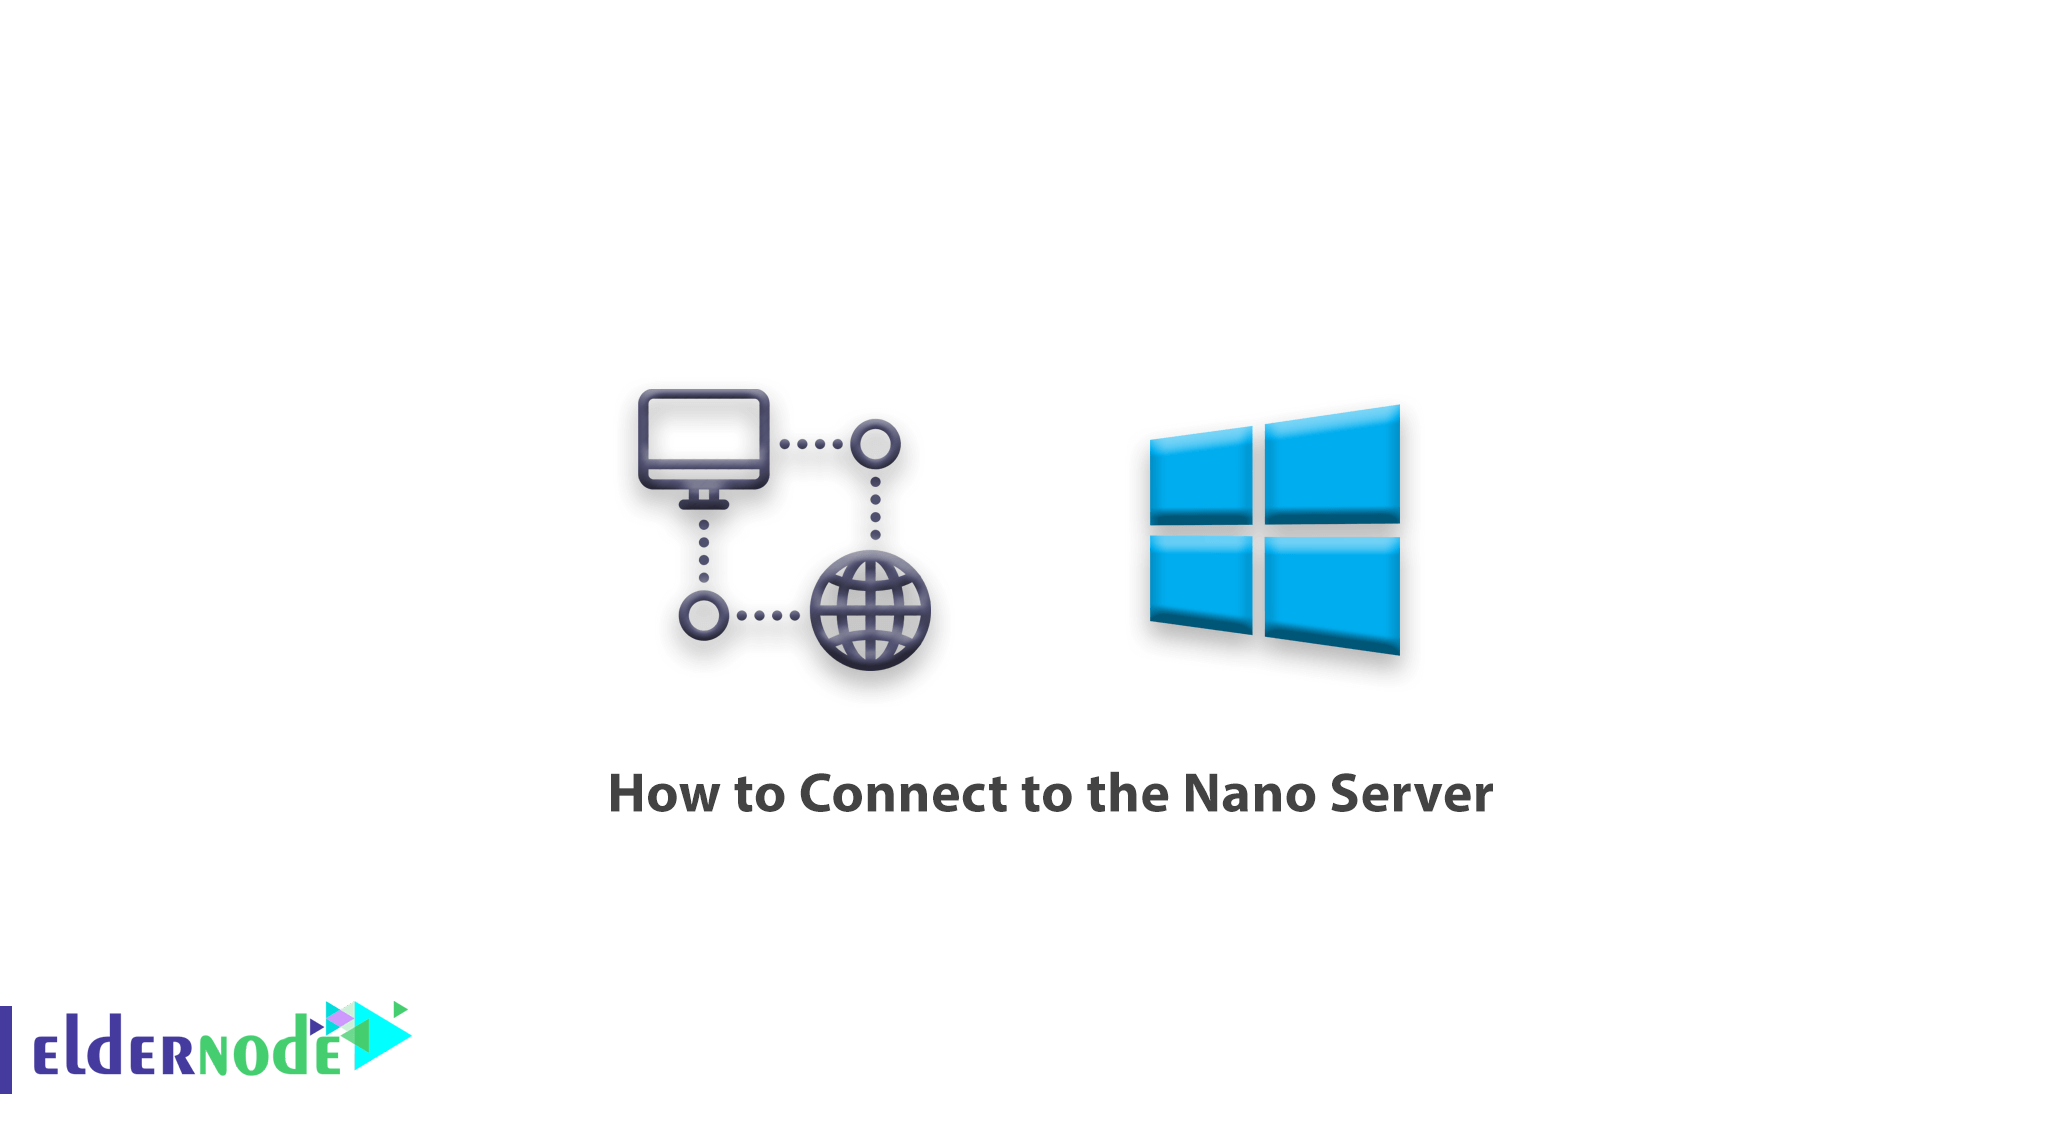 How to connect to the nano server